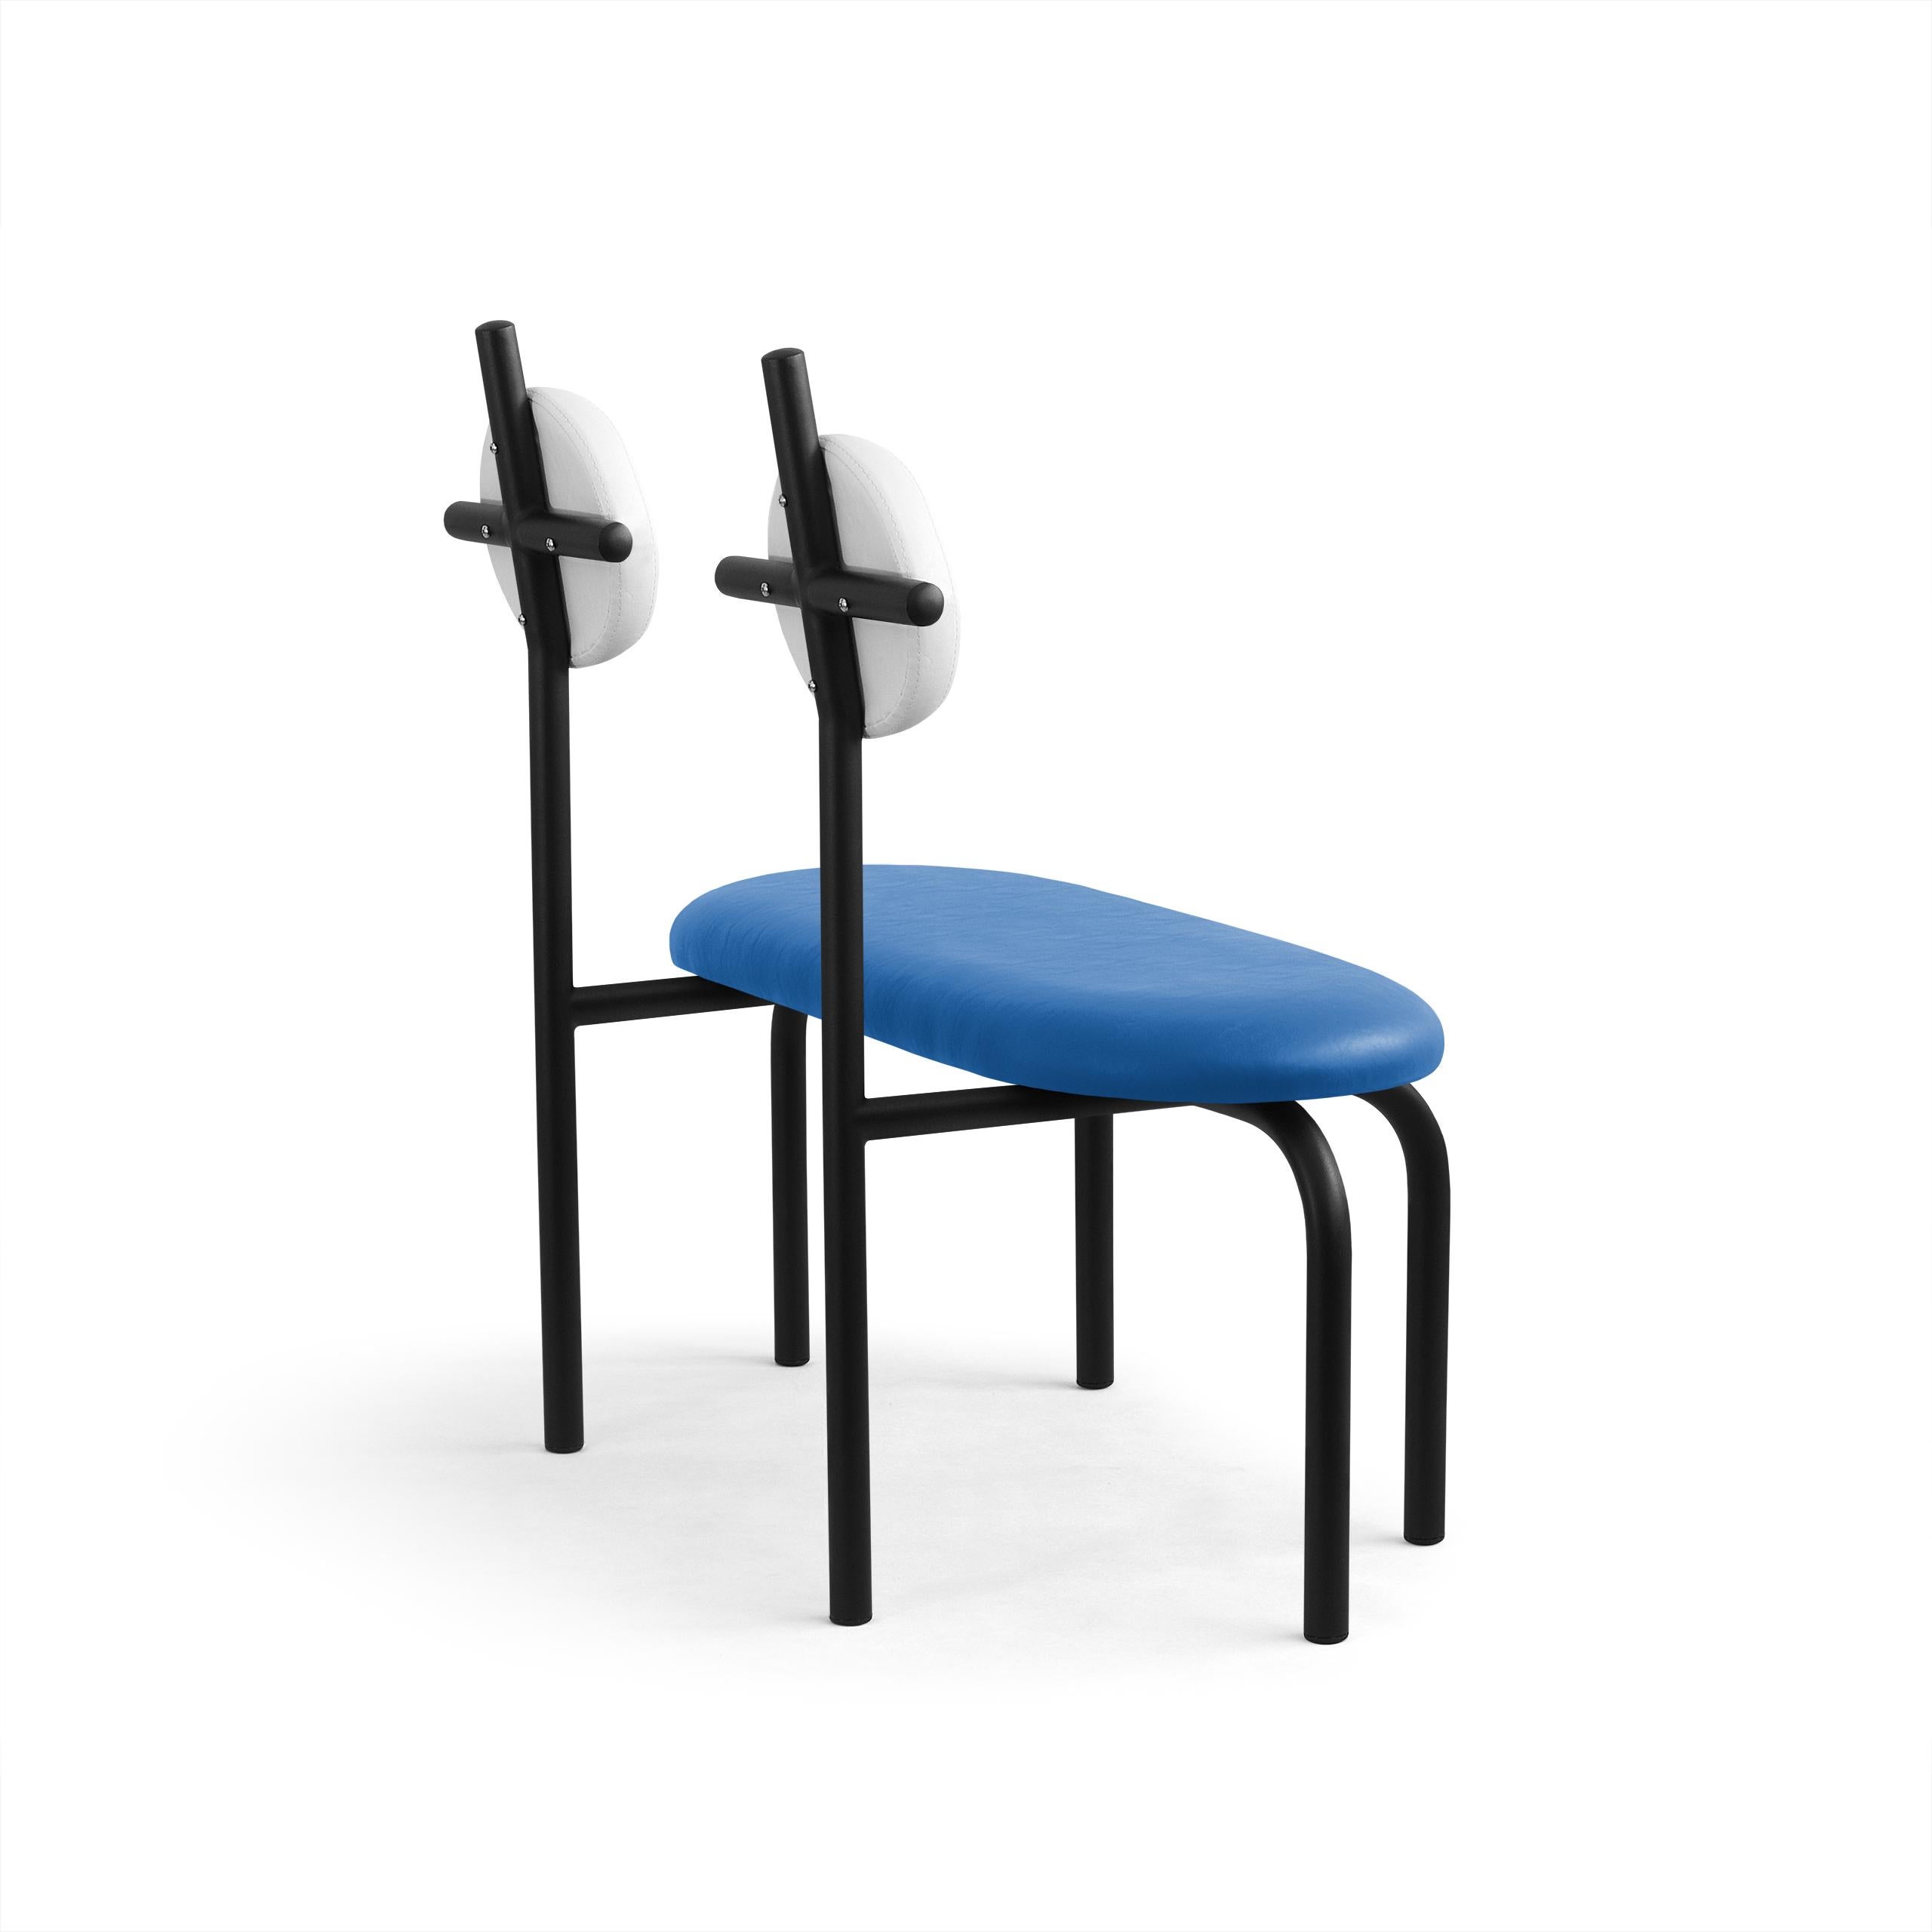 Appliqué PK17 Impermeable Loveseat, Blue Seat & Black Metal Structure by Paulo Kobylka For Sale